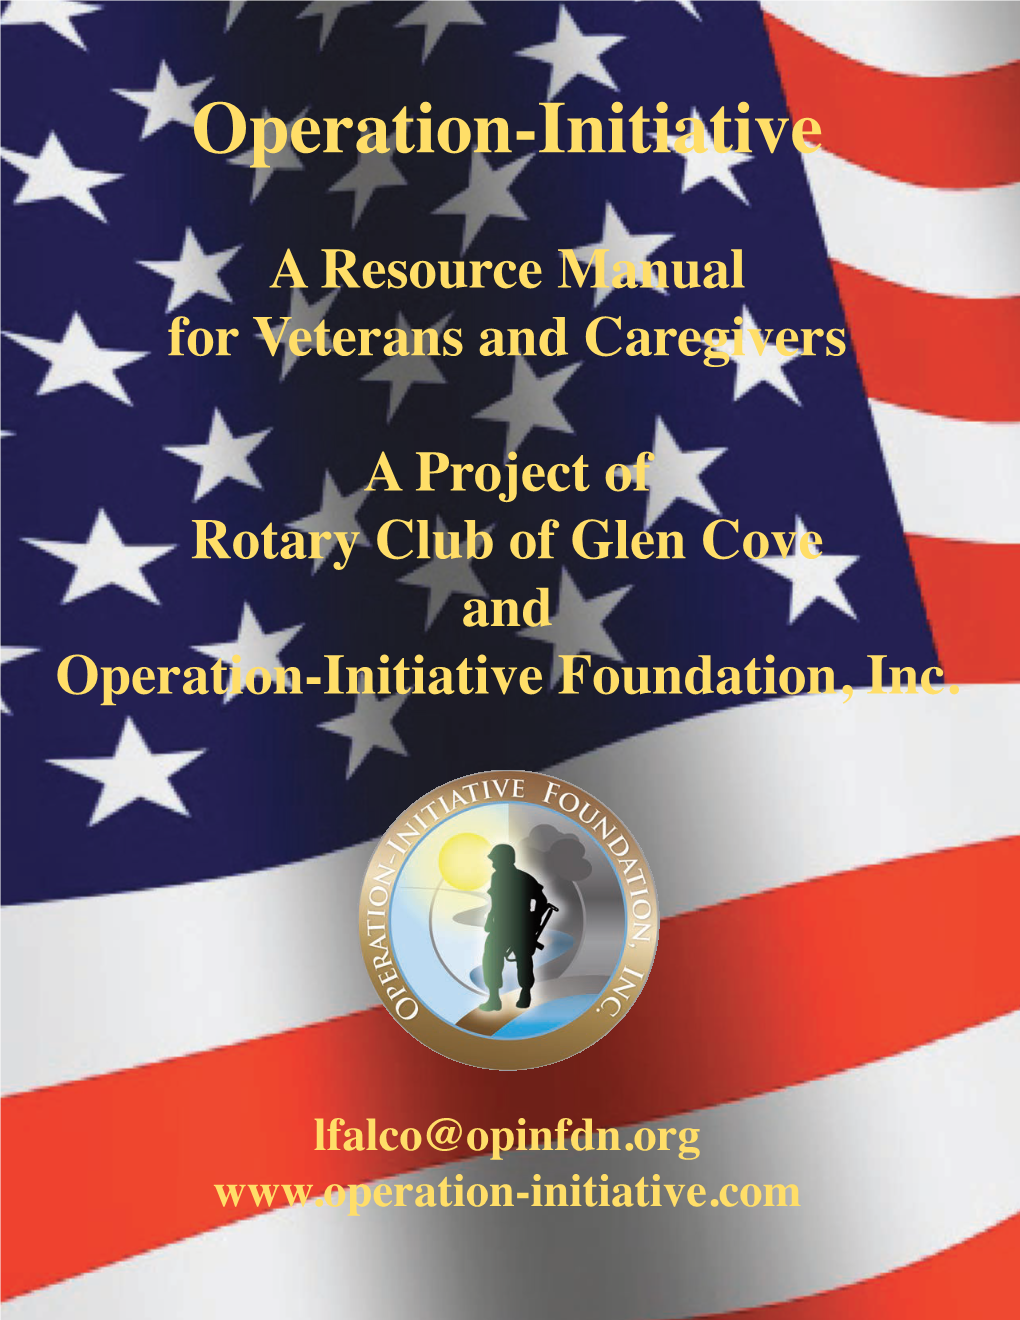 A Resource Manual for Veterans and Caregivers a Project of Rotary Club